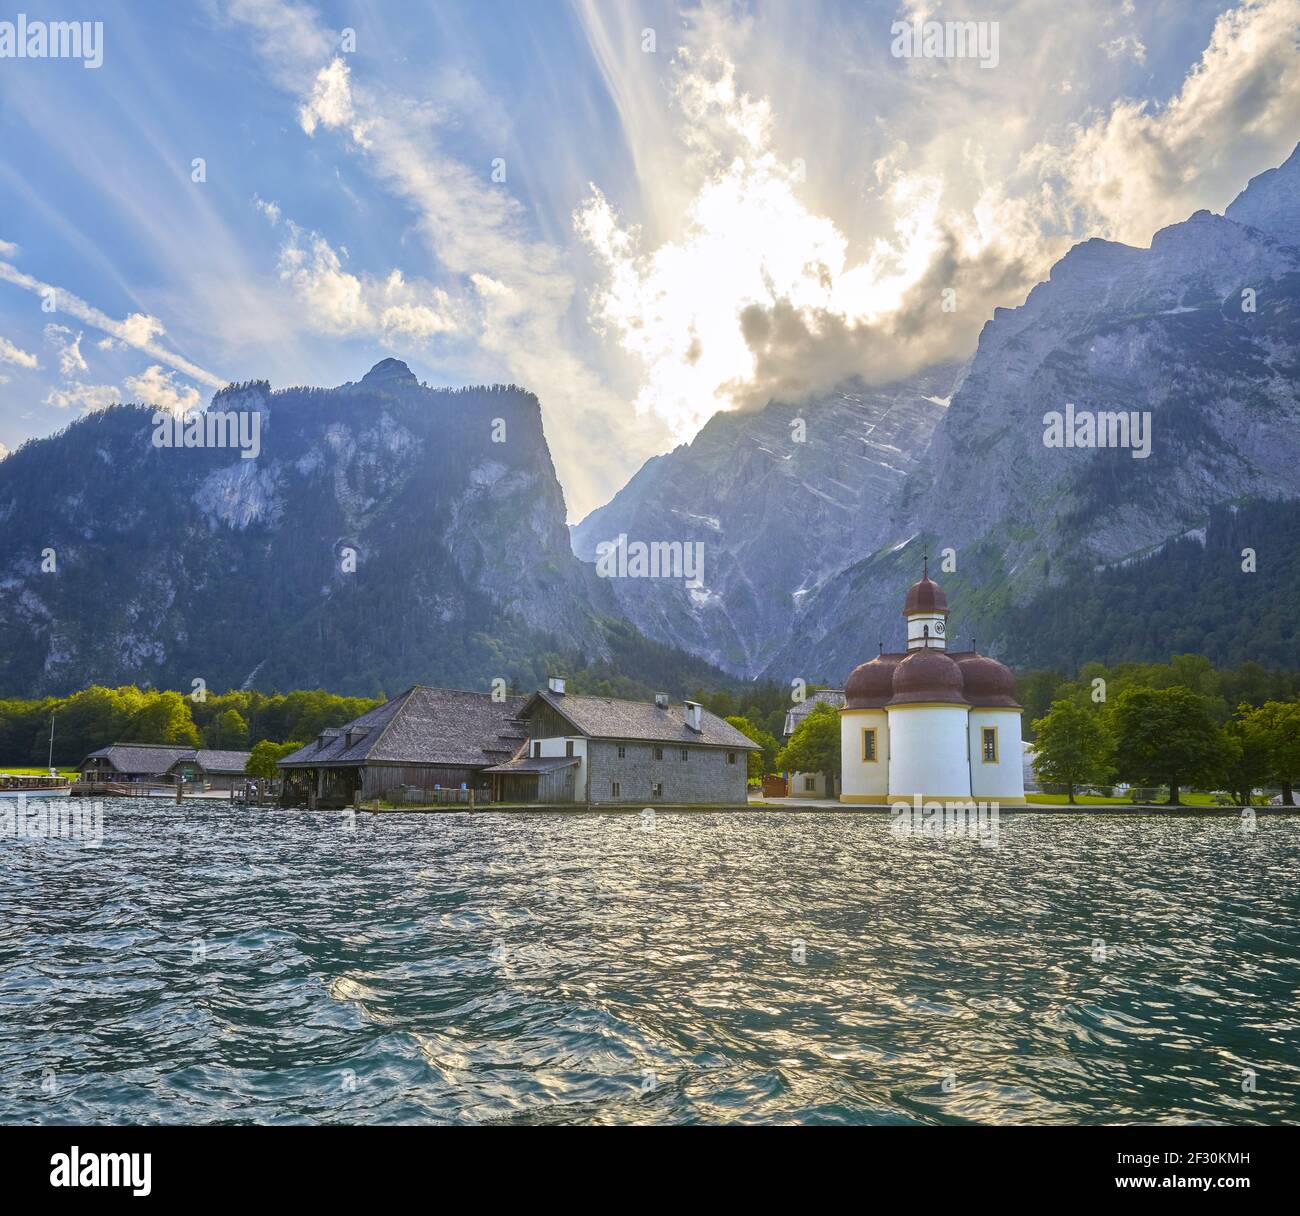 Bavarian impressions at Koenigssee, Germany. With the famous pilgrimage church of St. BartholomÃ¤. Stock Photo